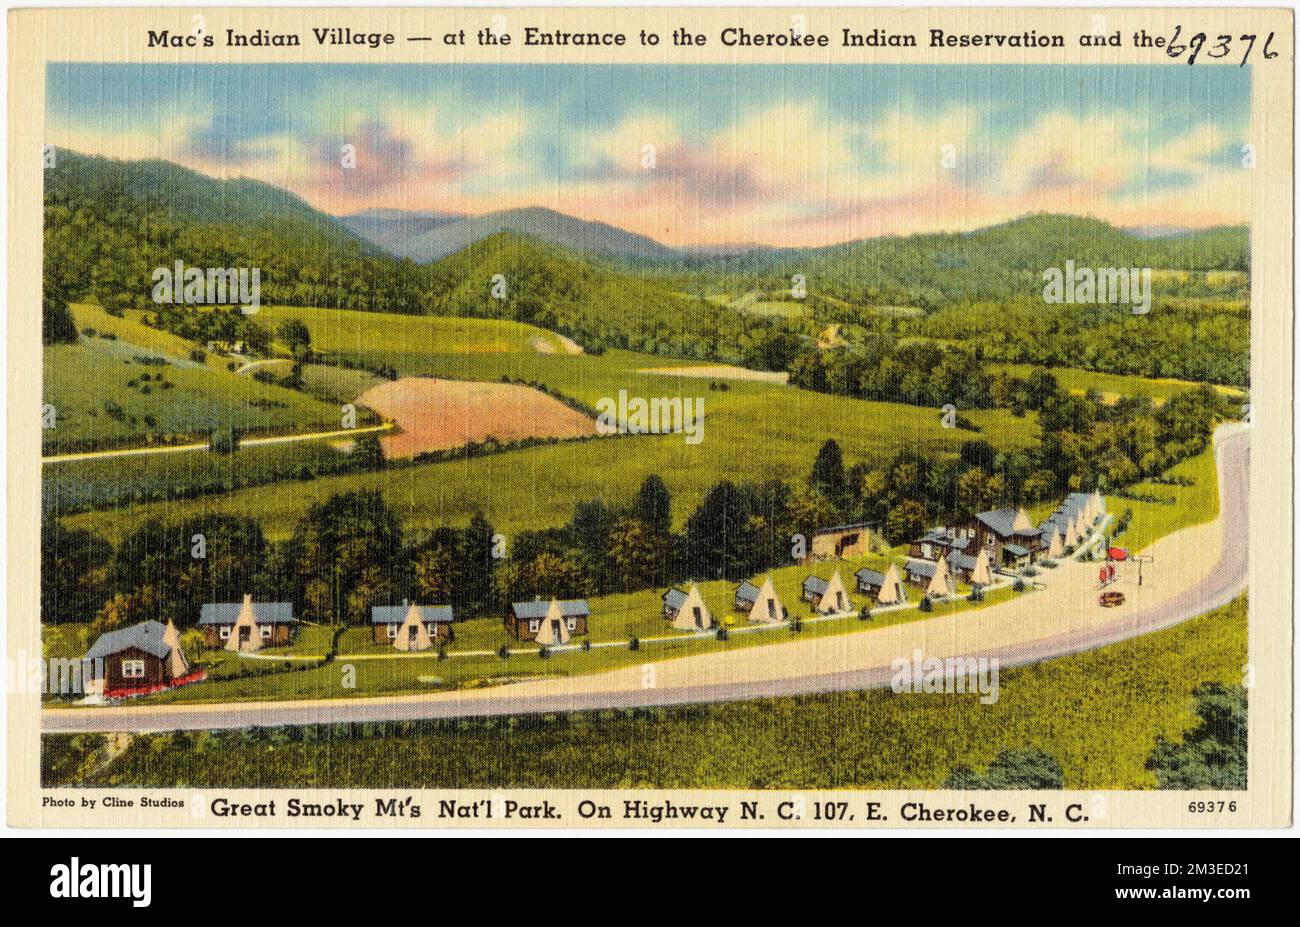 Mac's Indian Village -- at the entrance to the Cherokee Indian Reservation and the Great Smoky Mt's Nat'l Park. On Highway N. C. 107, E. Cherokee, N. C. , Motels, Tichnor Brothers Collection, postcards of the United States Stock Photo